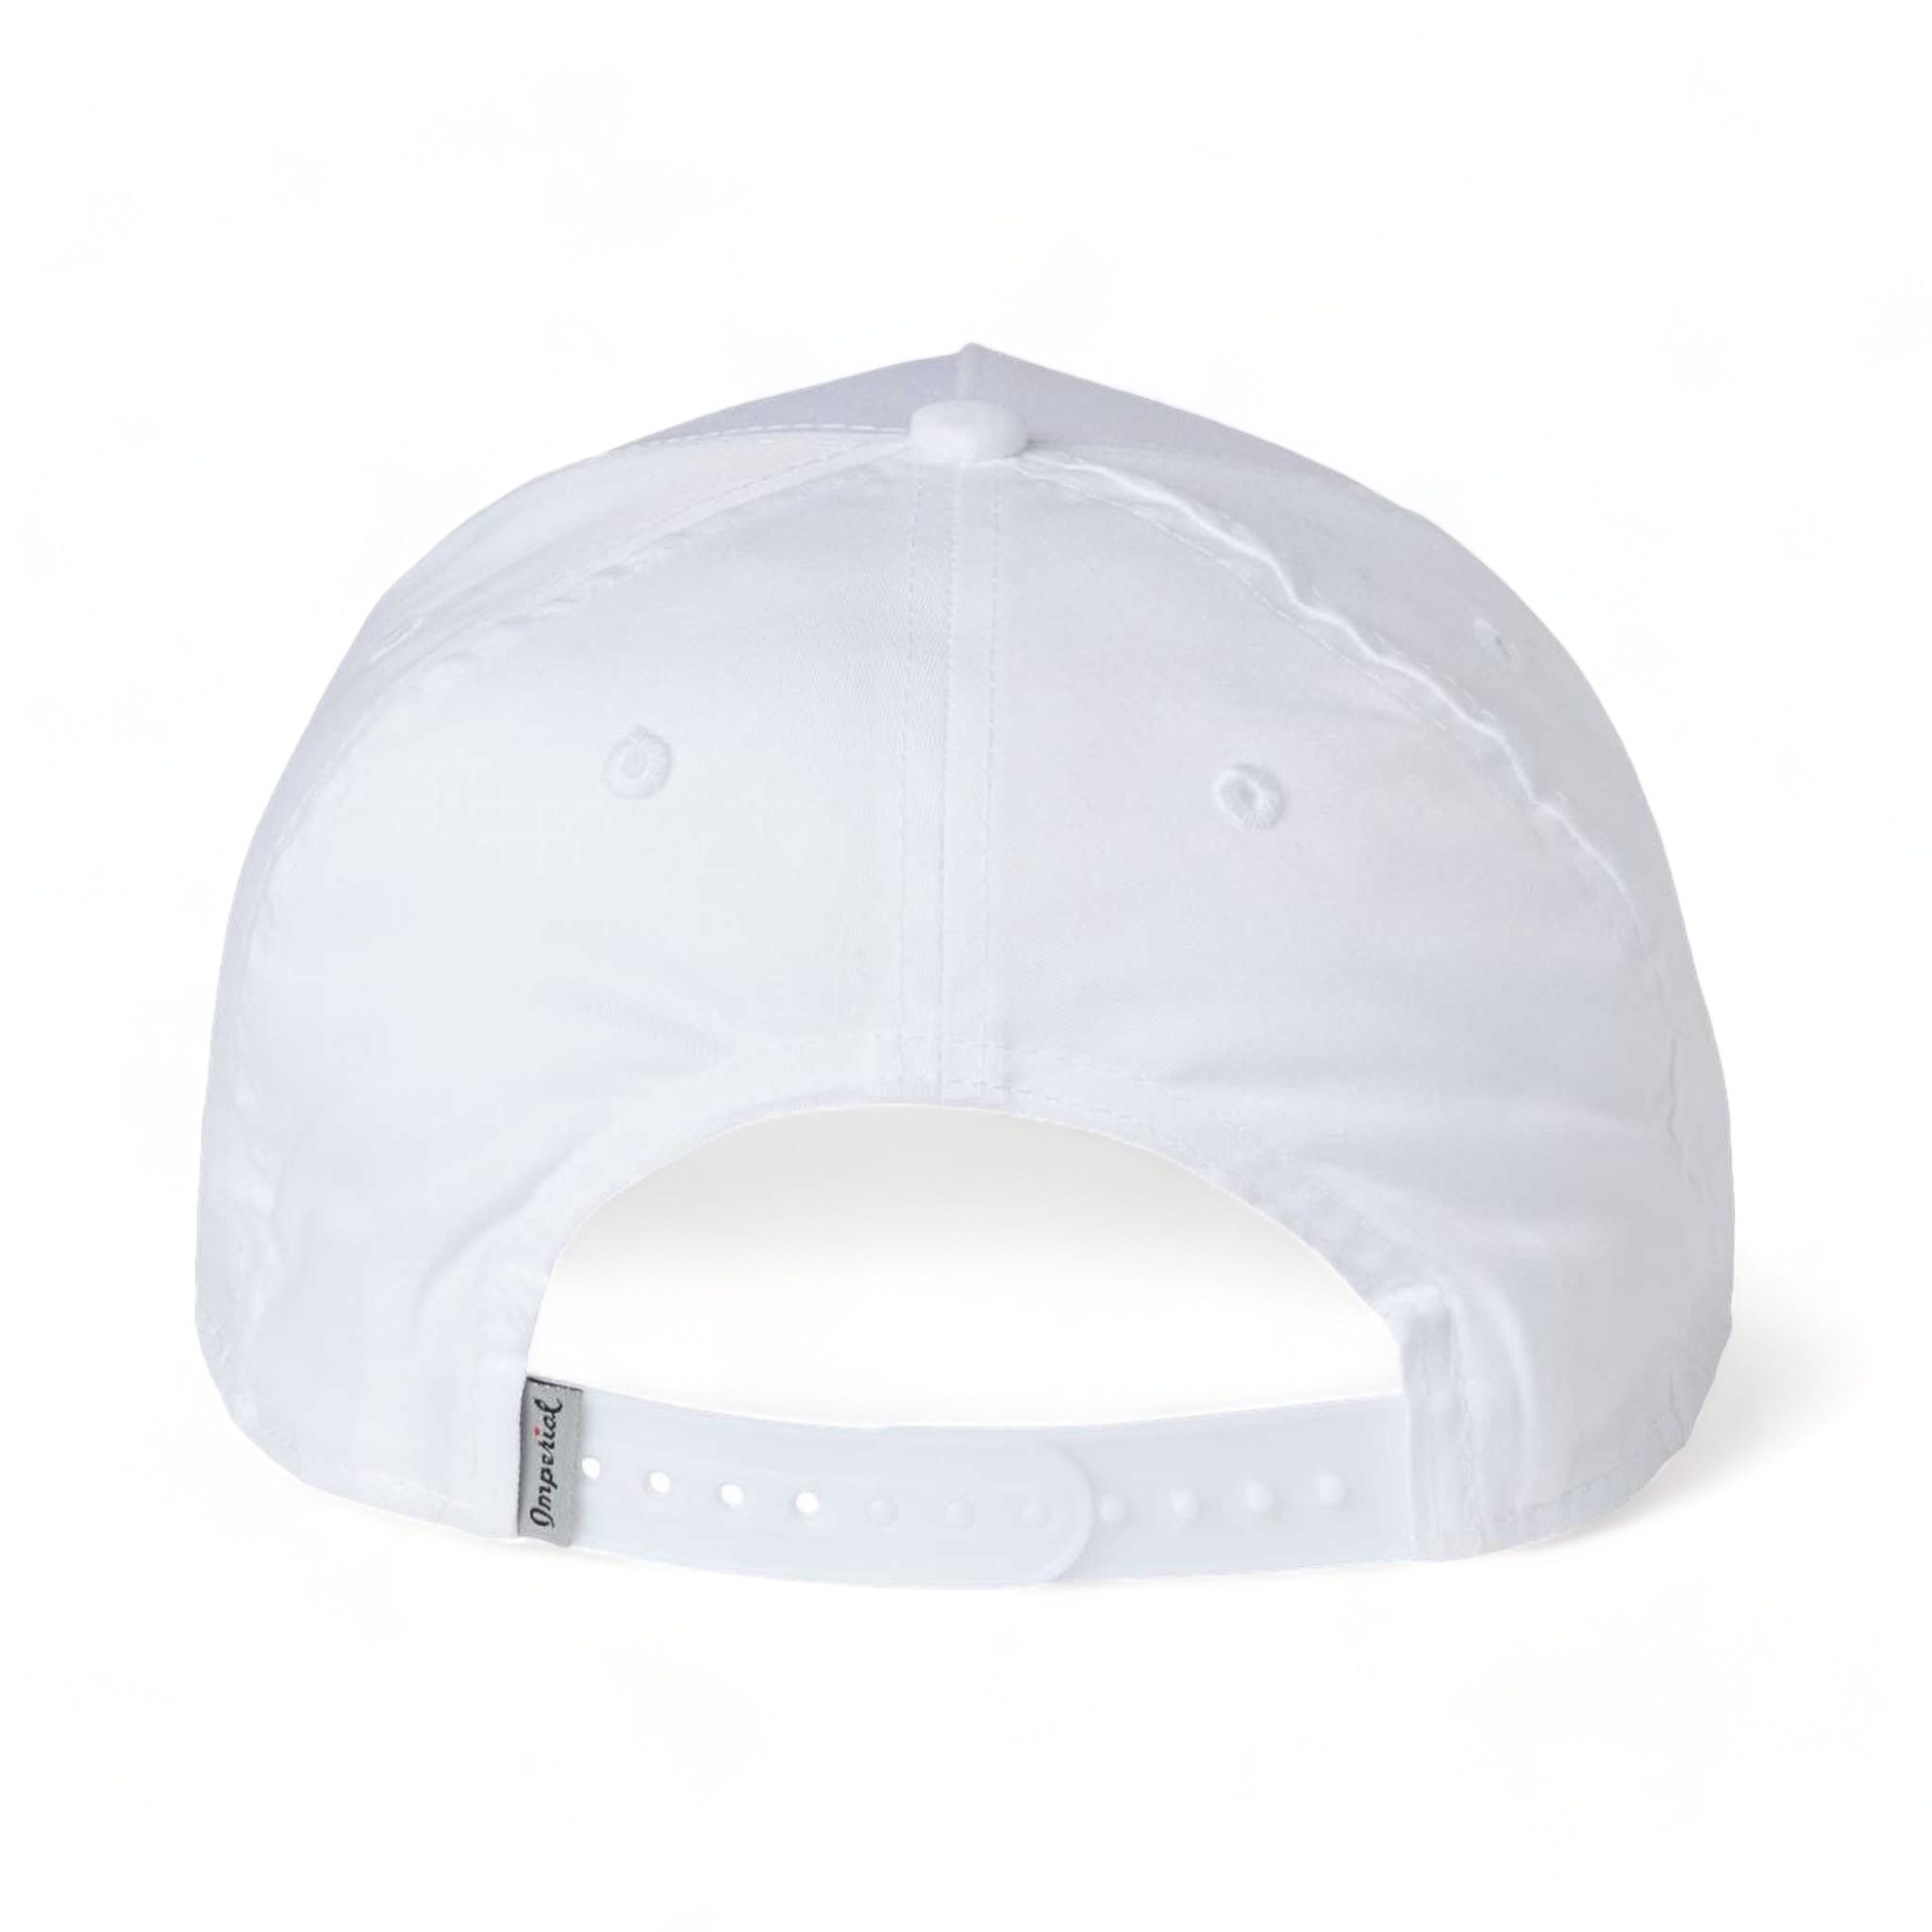 Back view of Imperial 5056 custom hat in white and black